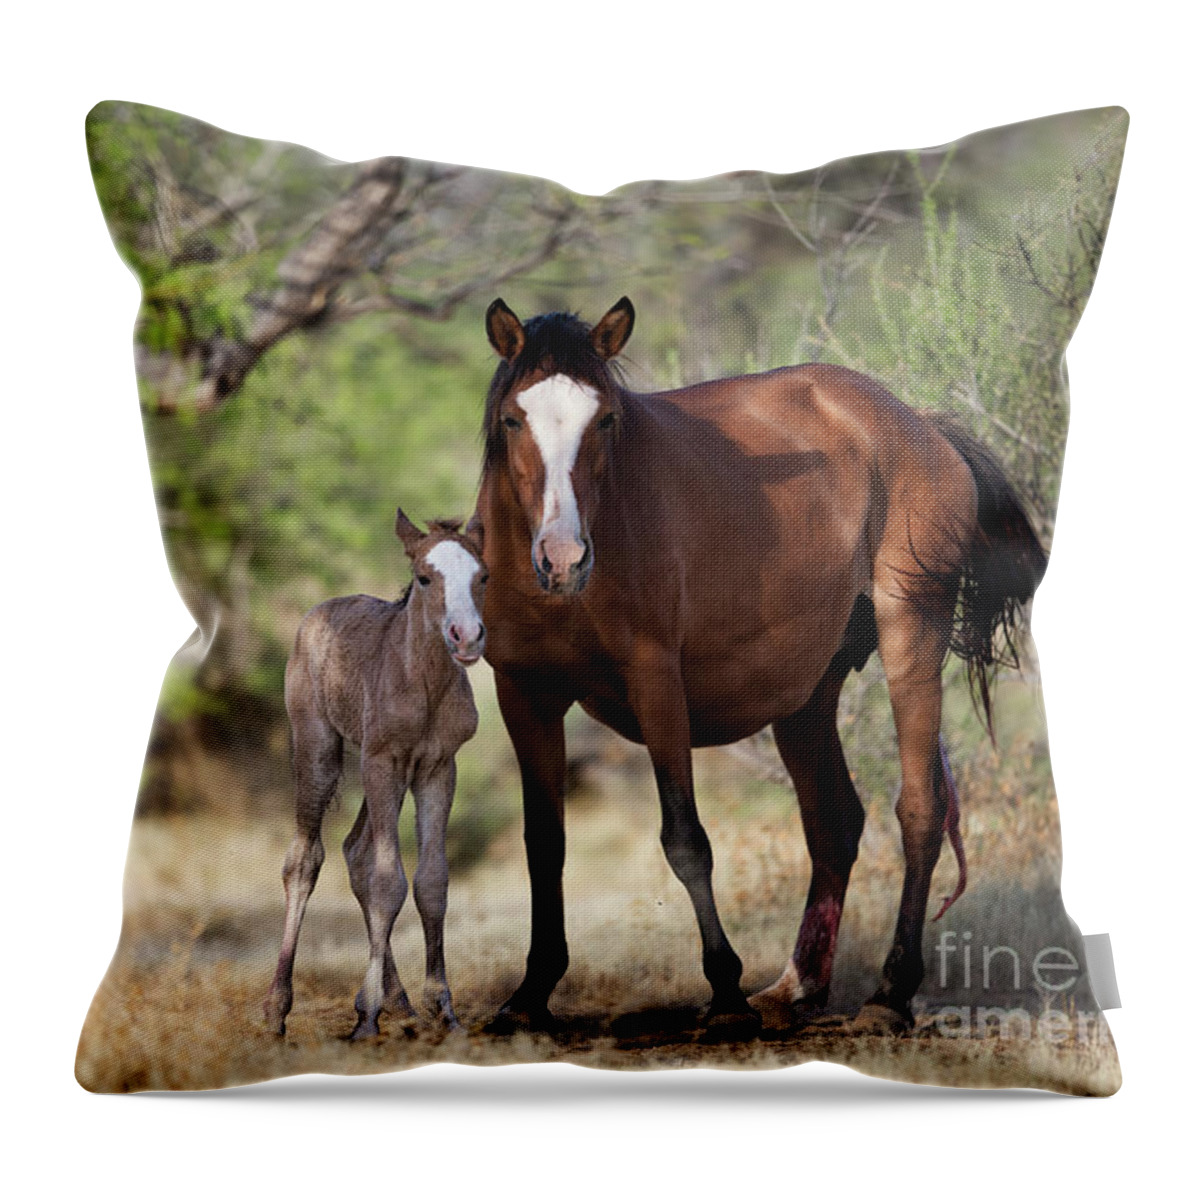 Cute Foal Throw Pillow featuring the photograph Newborn by Shannon Hastings